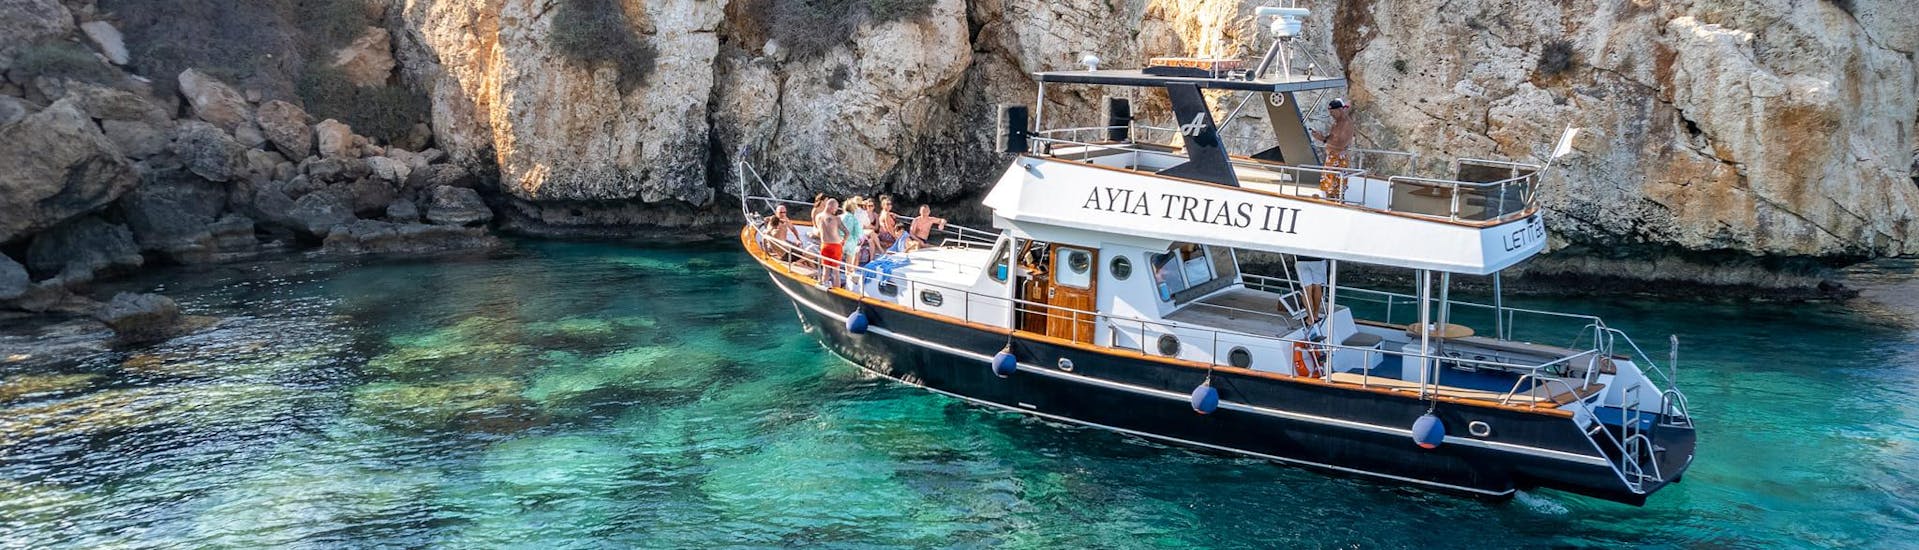 The boat of Ayia Trias Cruises Cyprus in the Blue Lagoon during on of their boat trips.